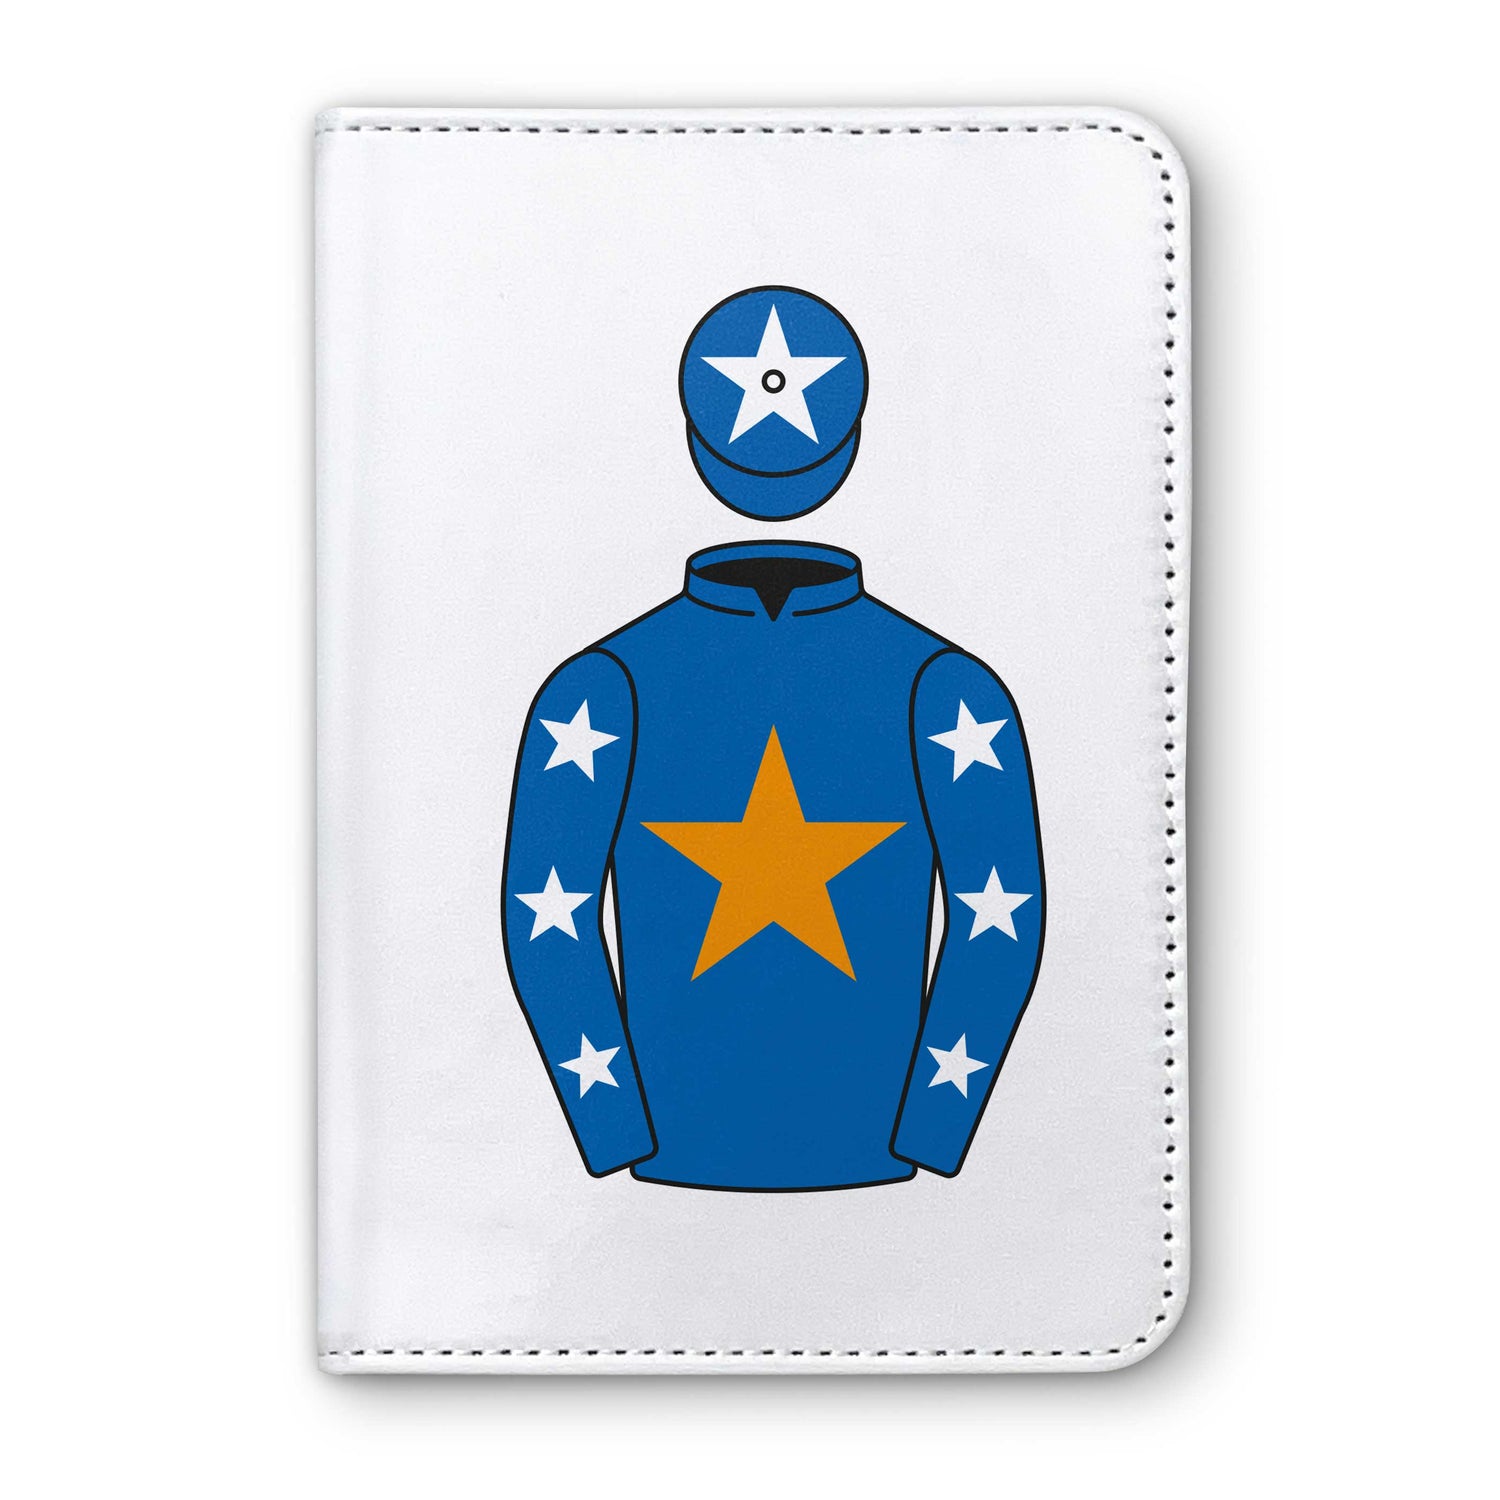 Allson Sparkle Ltd Horse Racing Passport Holder - Hacked Up Horse Racing Gifts